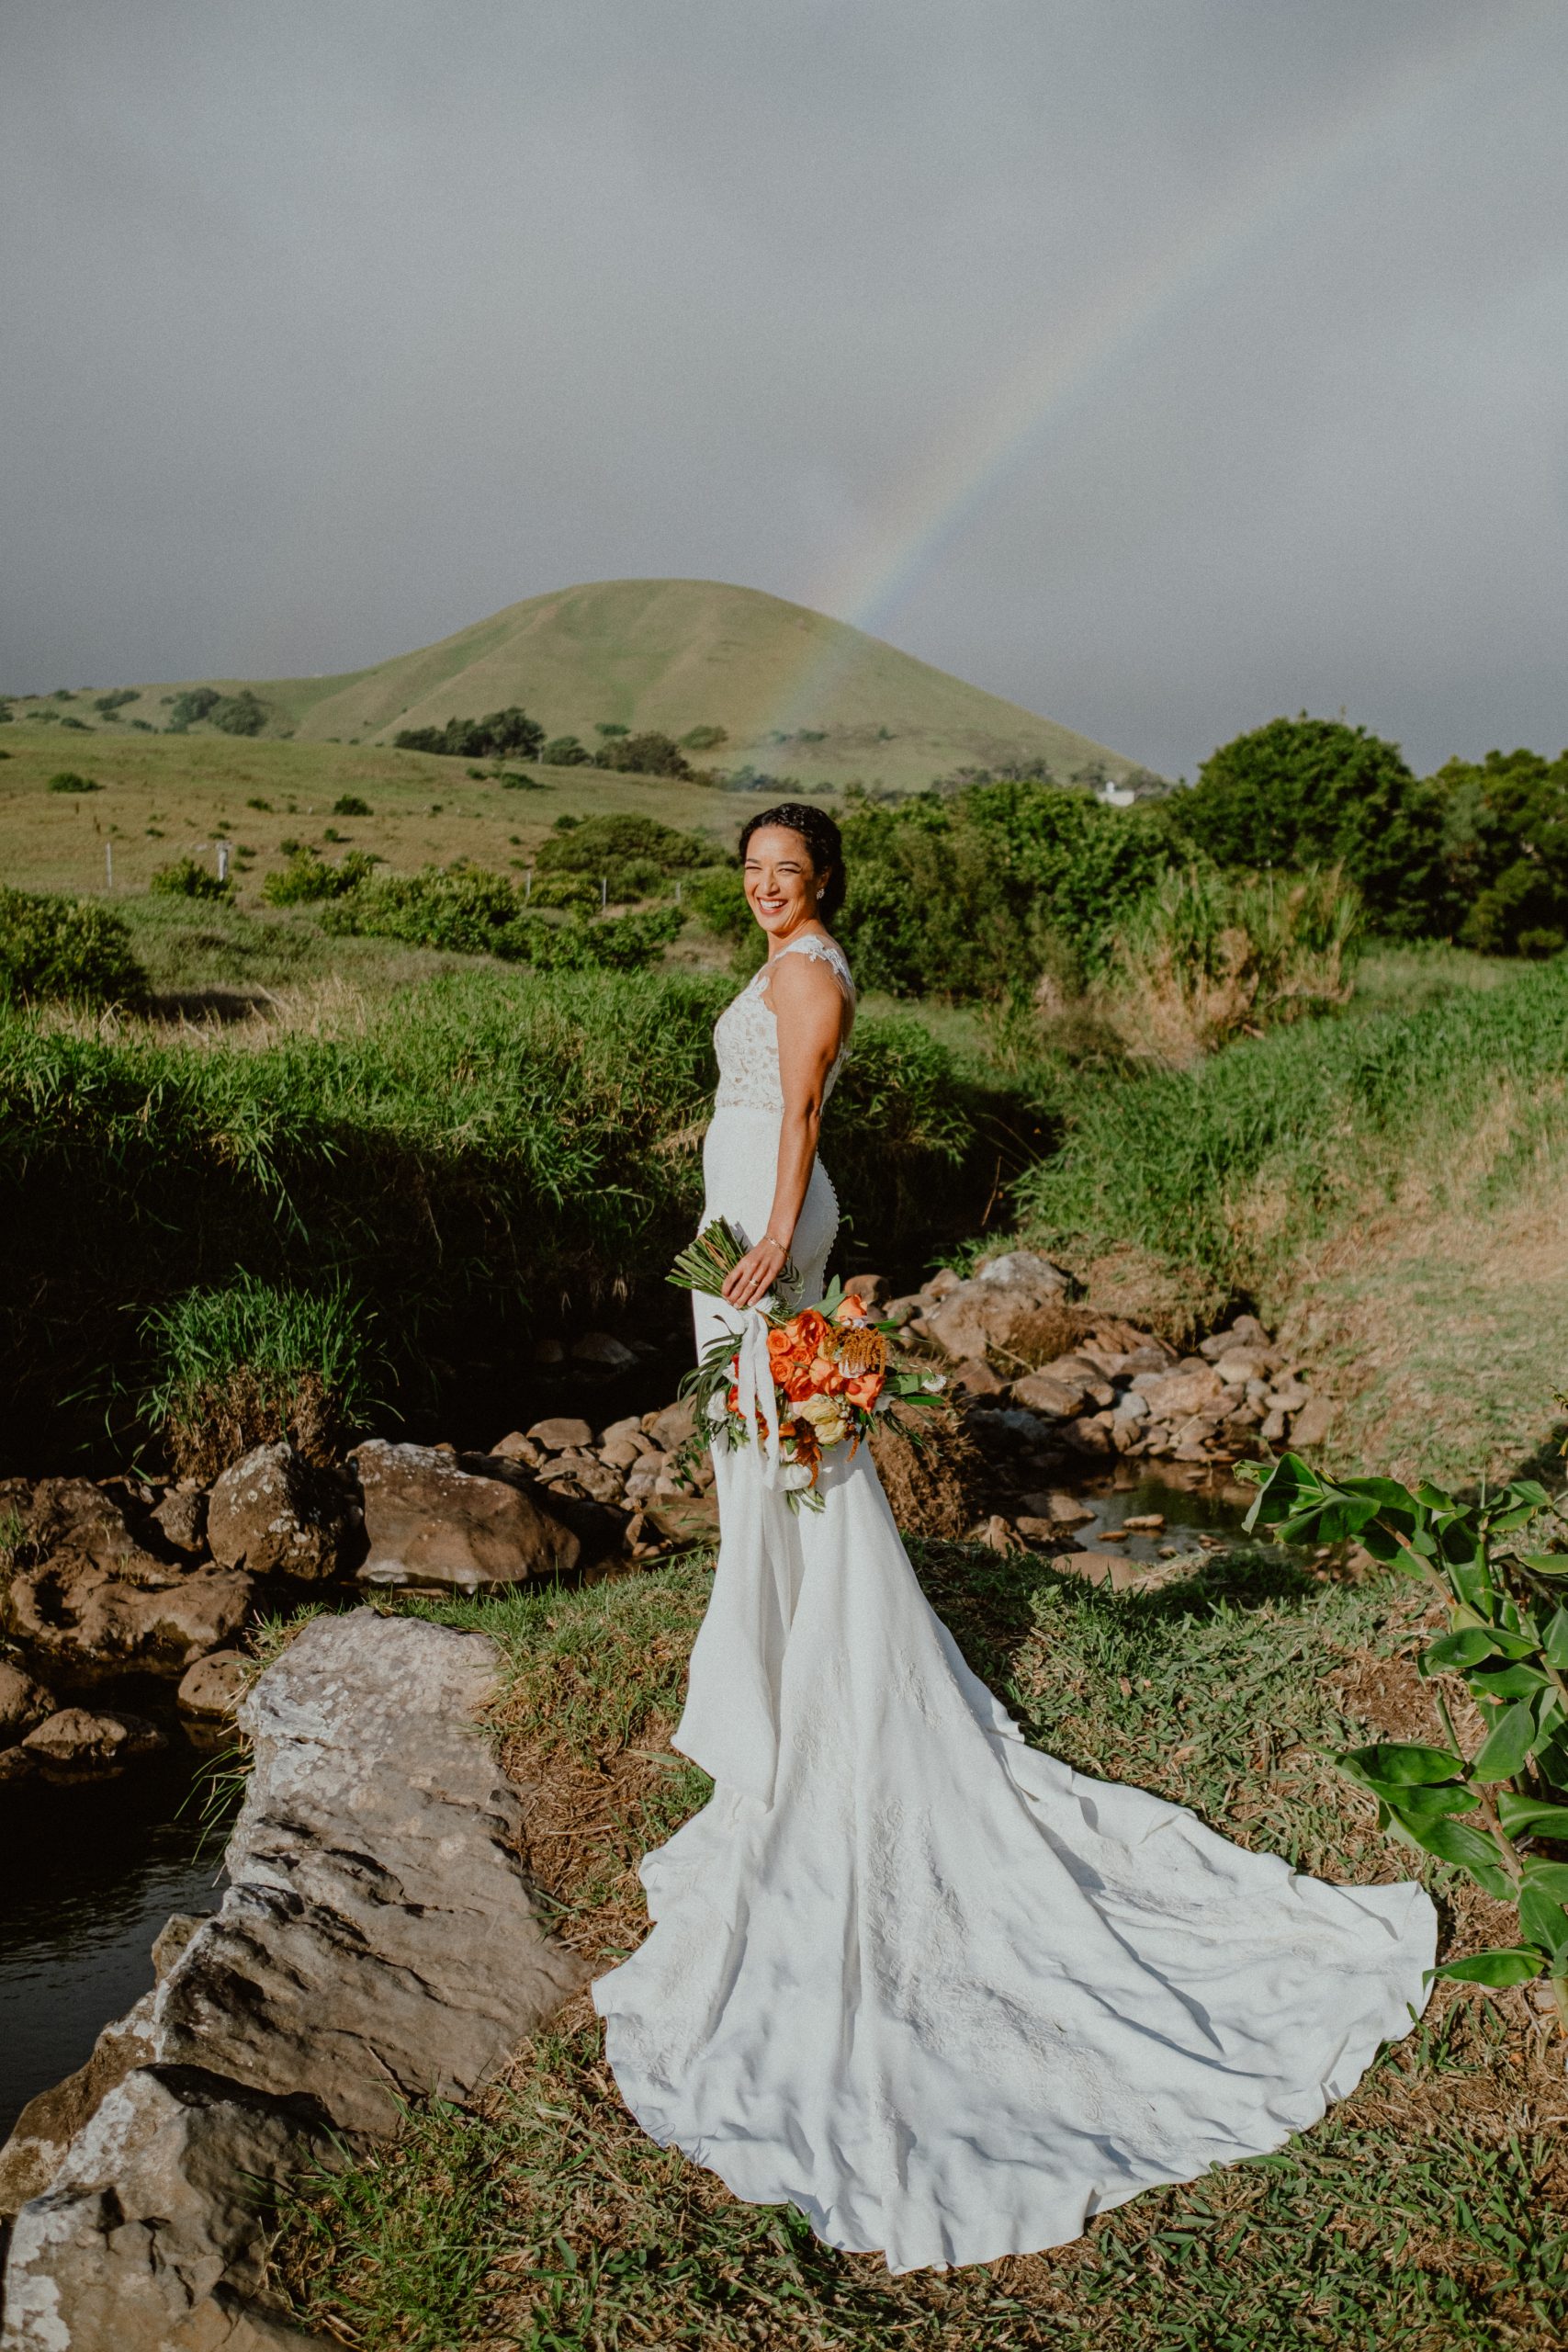 Fall bridal wedding day photography with white lace gown and long train with Hawaiian rainbow over Big Island wedding location inspiration Bride style wedding day inspriation | Big Island Elopement, Hawaii Elopement Photographer, Hawaii Elopement and Wedding Inspiration, Hawaii Elopement ideas, Big Island Wedding Inspiration, Fall Hawaiian Wedding Ideas, Fall Wedding Inspiration, Hawaii Outdoor Wedding Ideas | chelseaabril.com